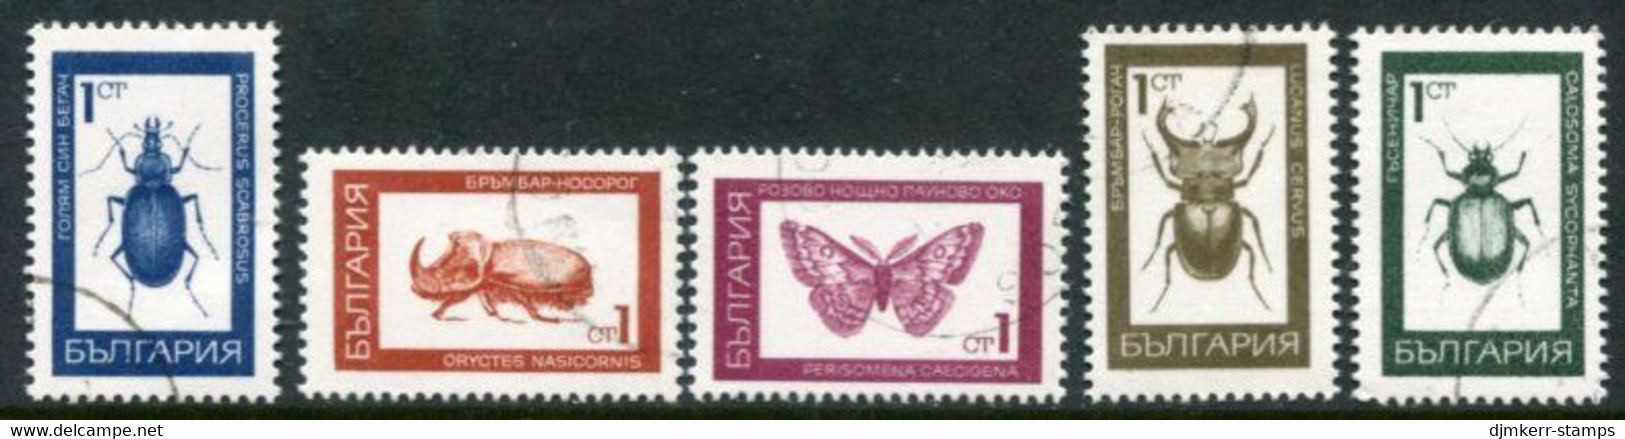 BULGARIA 1968 Insects Used.  Michel 1826-30 - Used Stamps